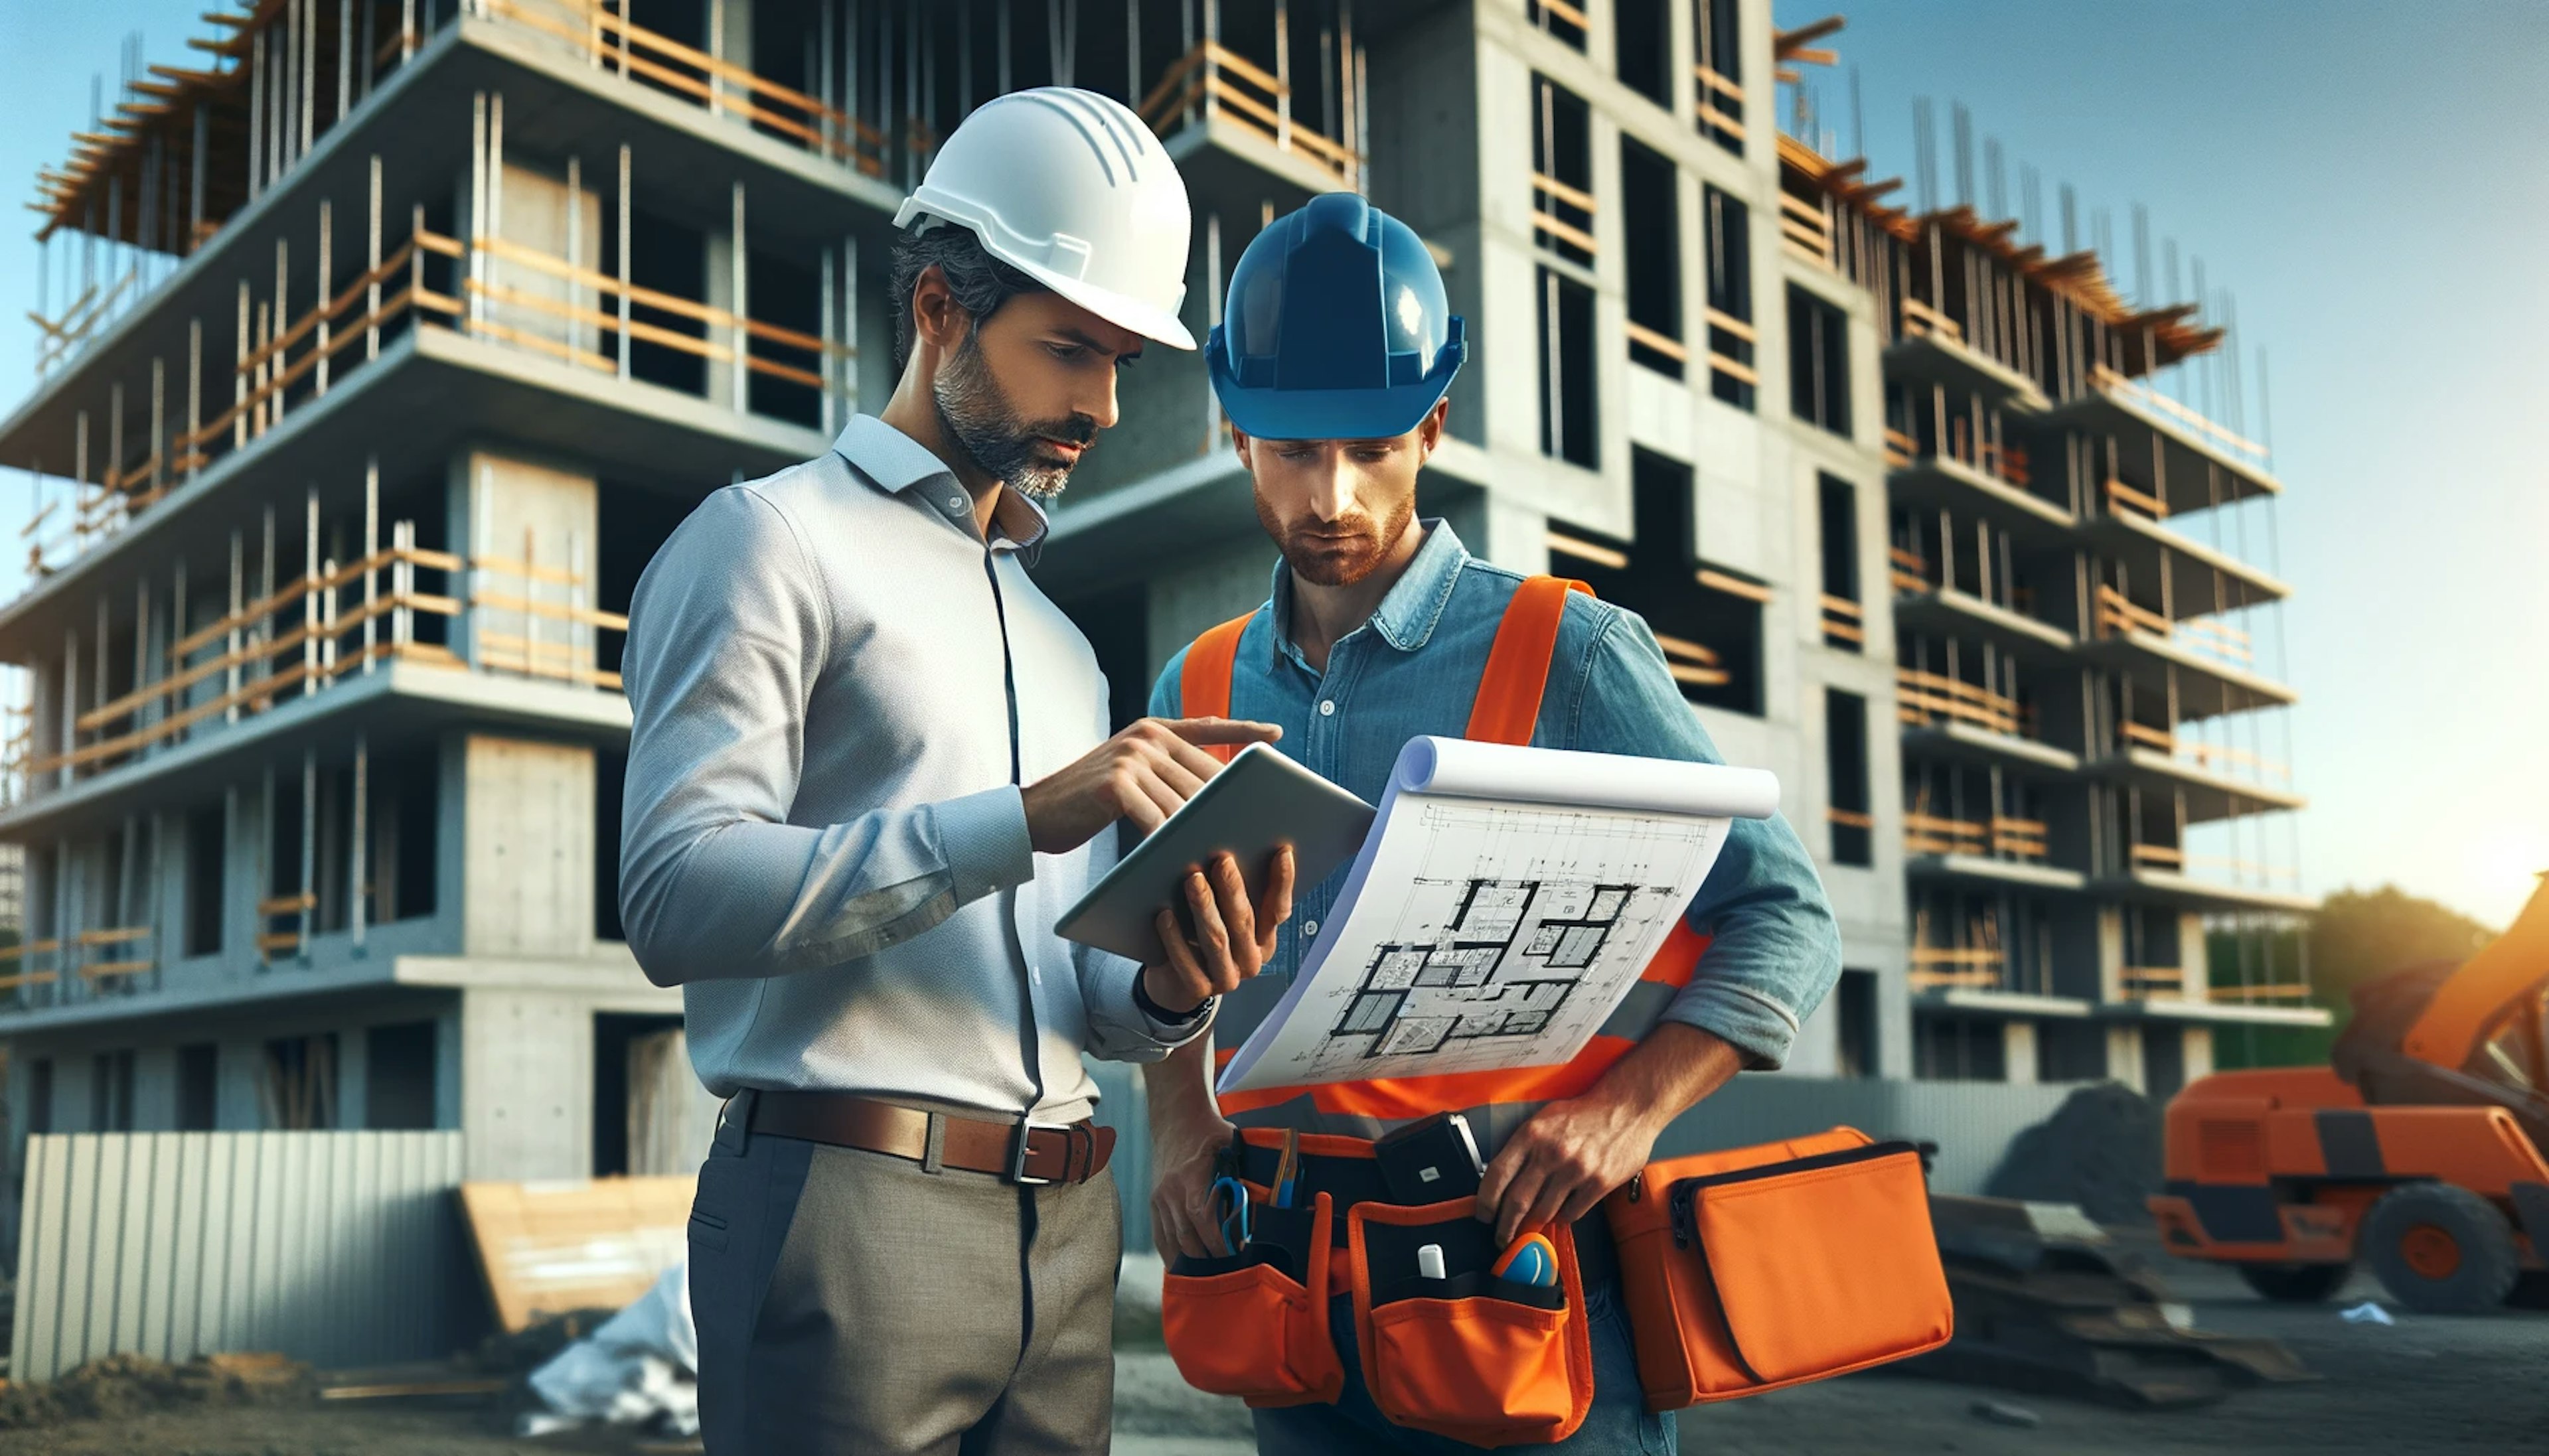 Architect and builder on-site, reviewing working drawings with a tablet